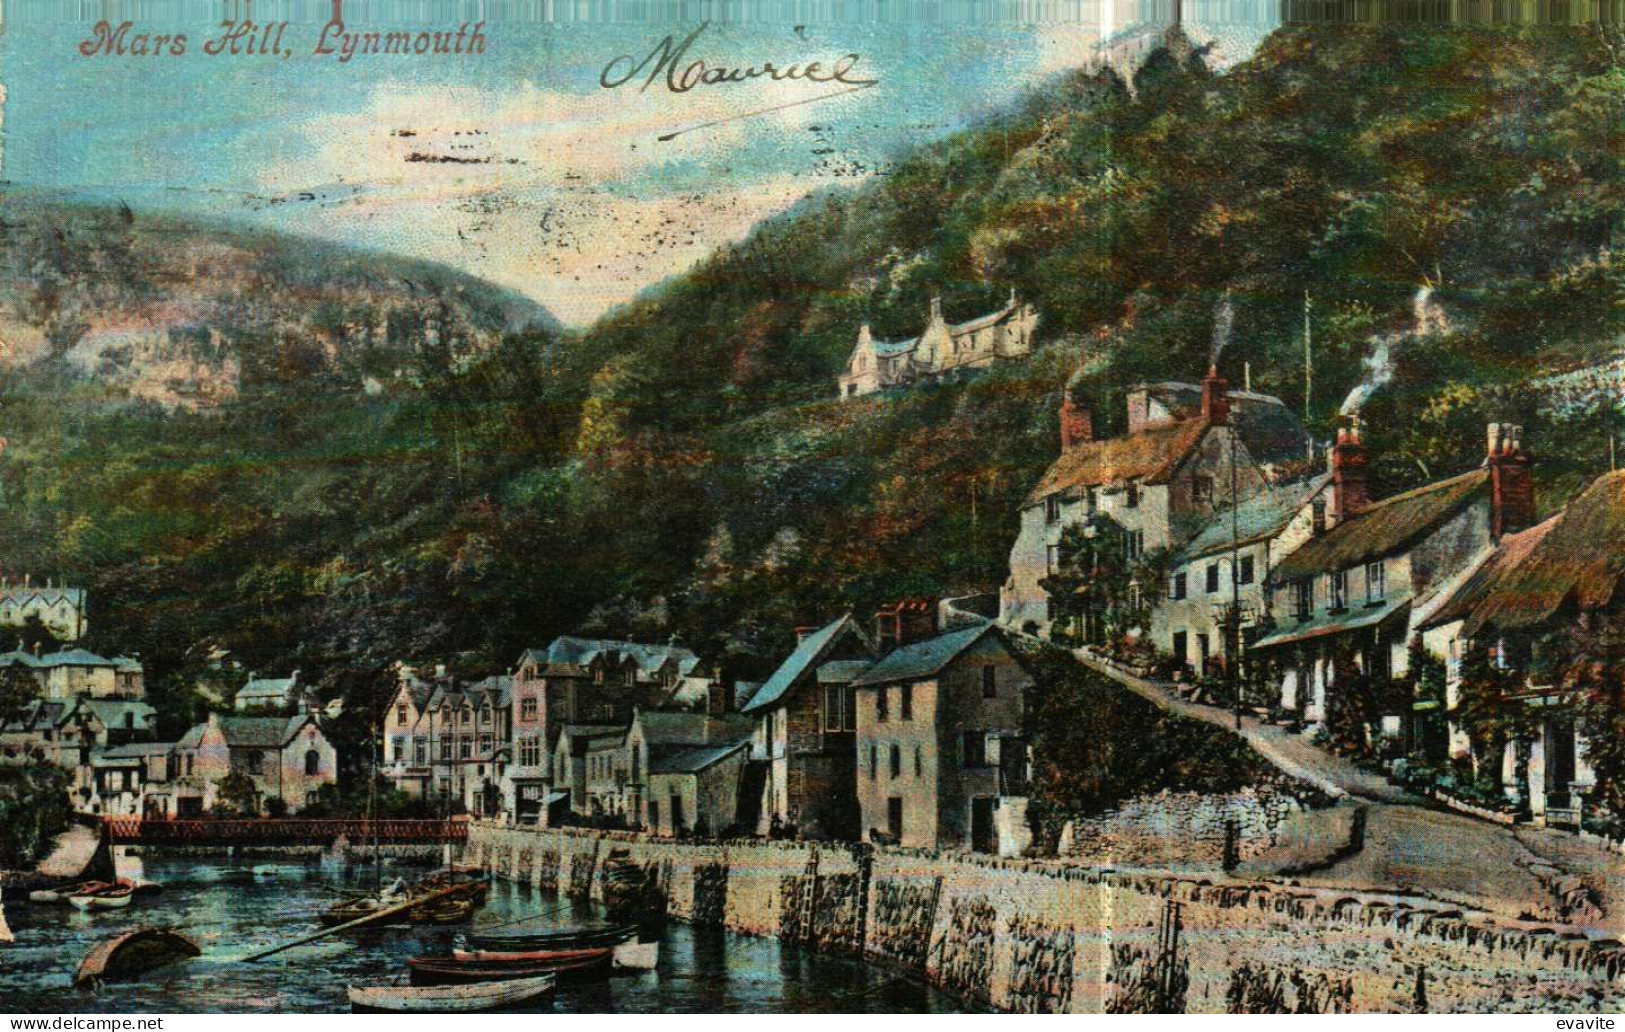 CPA   Royaume-Uni Angleterre -   LYNMOUTH   Mars Hill - Lynmouth & Lynton